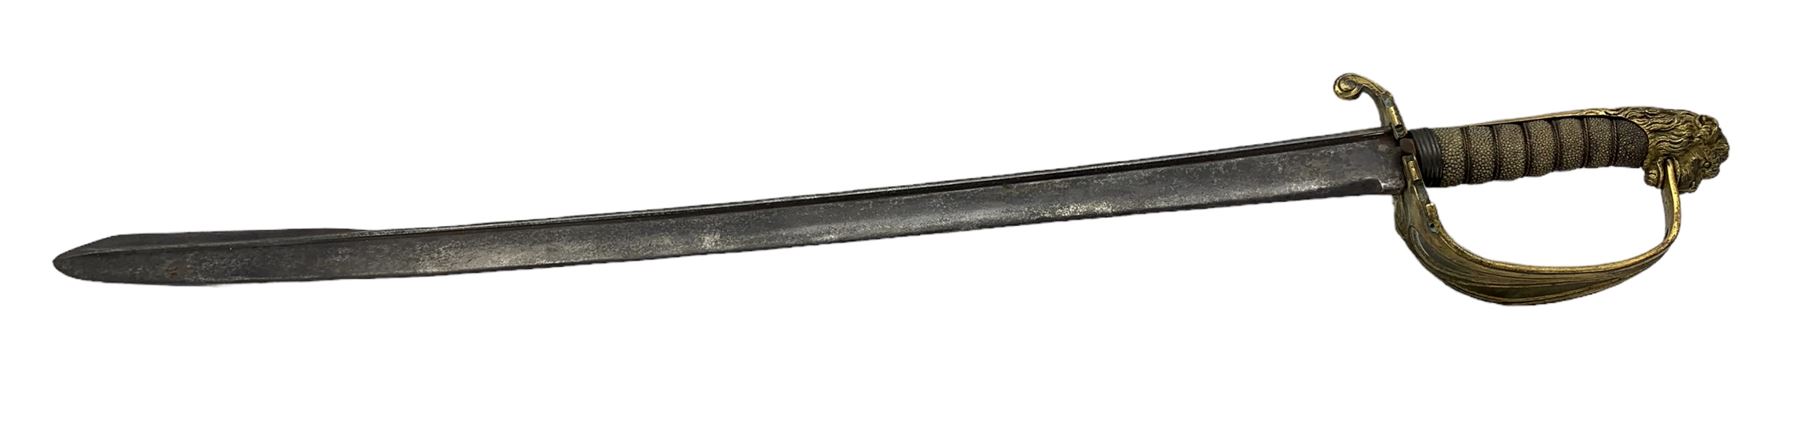 Early 19th century Naval officers sword with pipe back blade